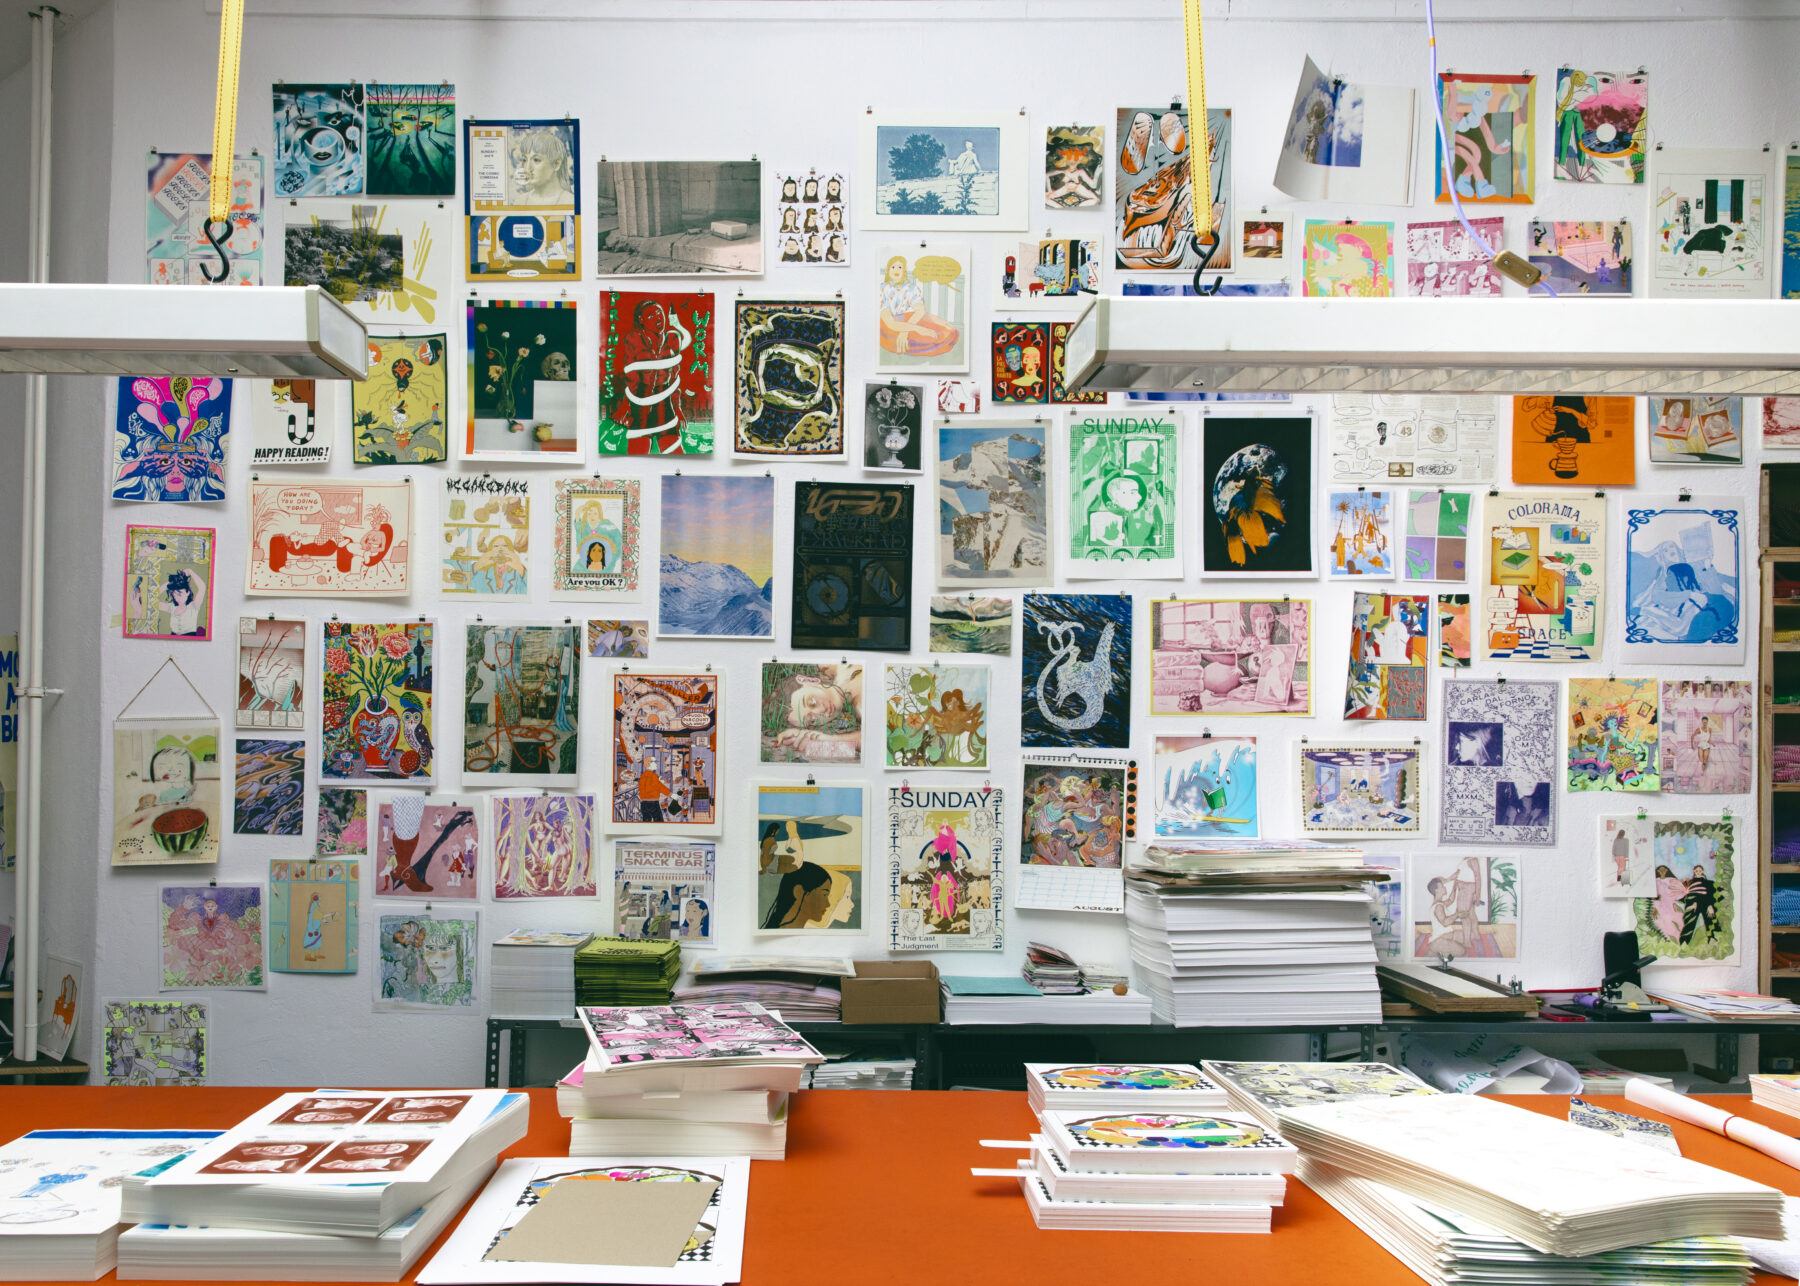 Colorama studio walls with illustrated images tacked all over. An orange table with stacks of printed books is in front.